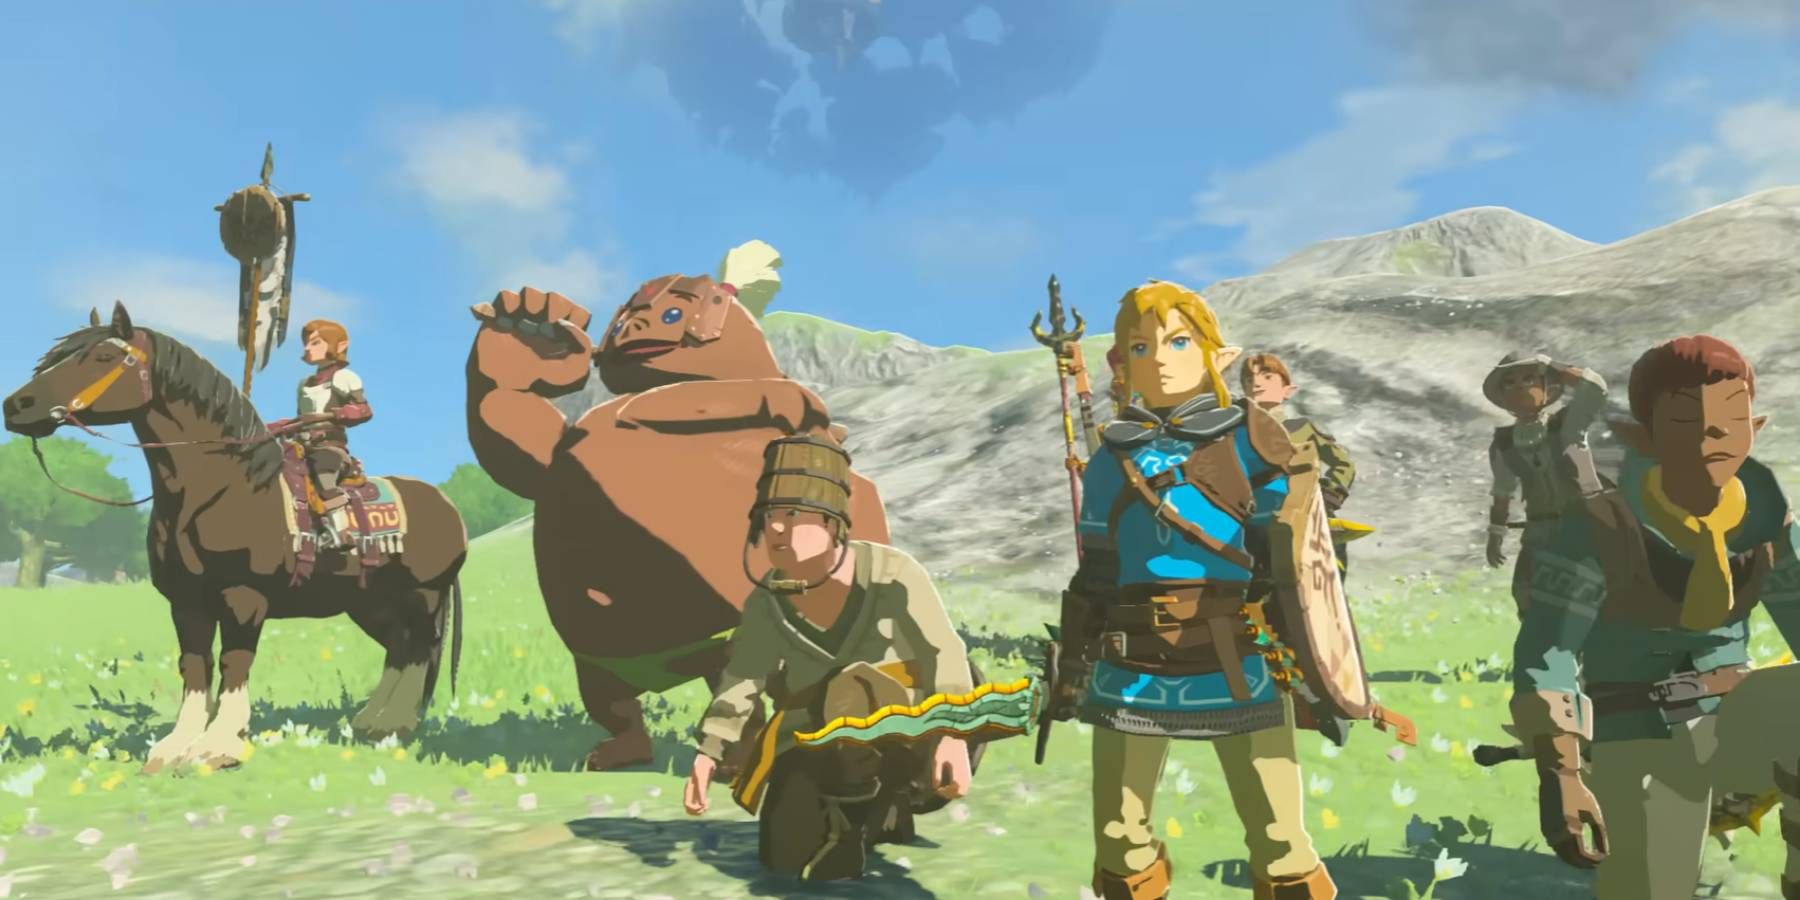 Link standing with several NPCs in The Legend of Zelda: Tears of the Kingdom